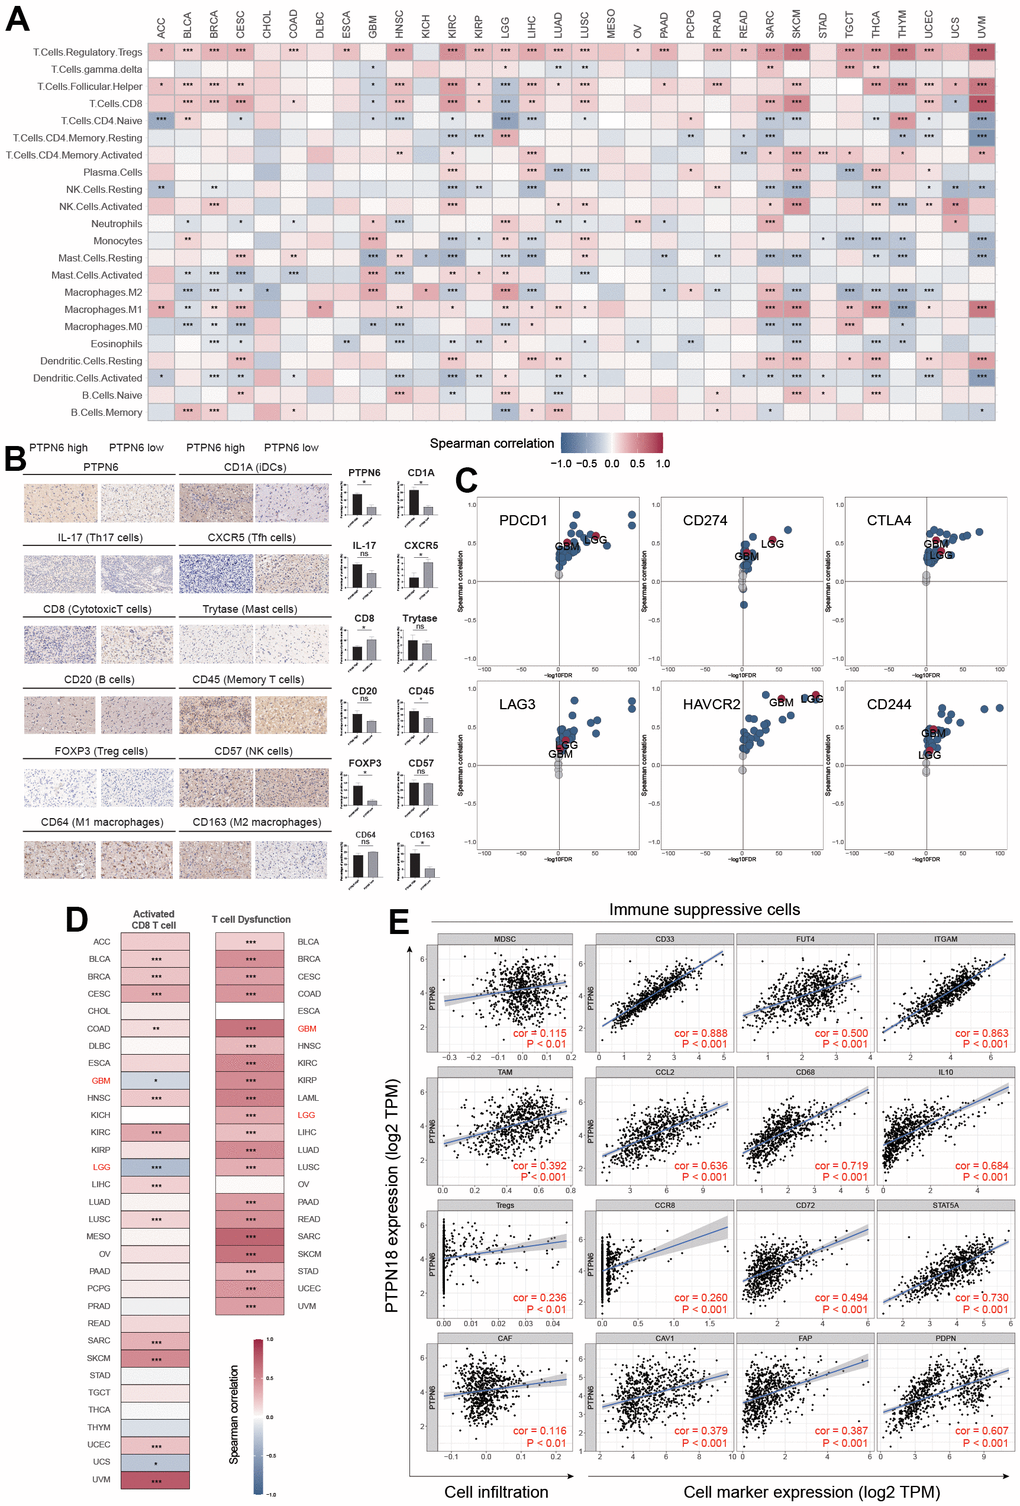 PTPN6 shapes the immunosuppressive TME in GBM. (A) Influence of PTPN6 with immune cell infiltration across different cancer. (B) TME comparison based on PTPN6 expression in GBM. (C) Association between PTPN6 and six immunosuppressive molecules across pan-cancer types. (D) Correlation of PTPN6 with activated CD8+ T cells and T cell exhaustion in different cancer types. (E) Correlation of PTPN6 with immunosuppressive cells and their representative marker genes. *P 